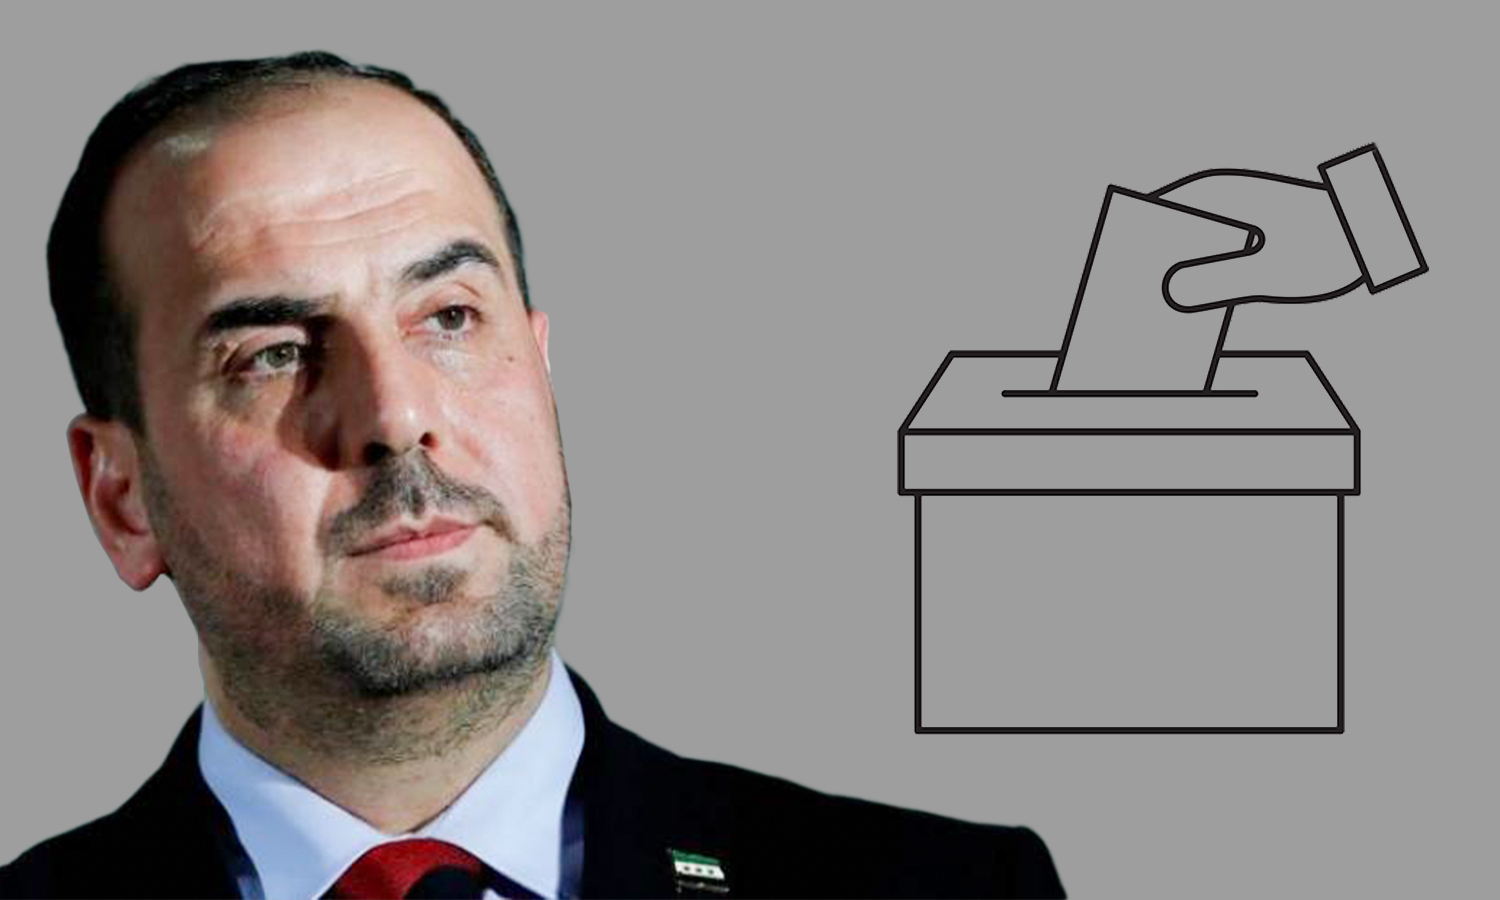 The head of the opposition Syrian National Coalition, Nasr al-Hariri, wants to run in the Syrian elections (Enab Baladi)